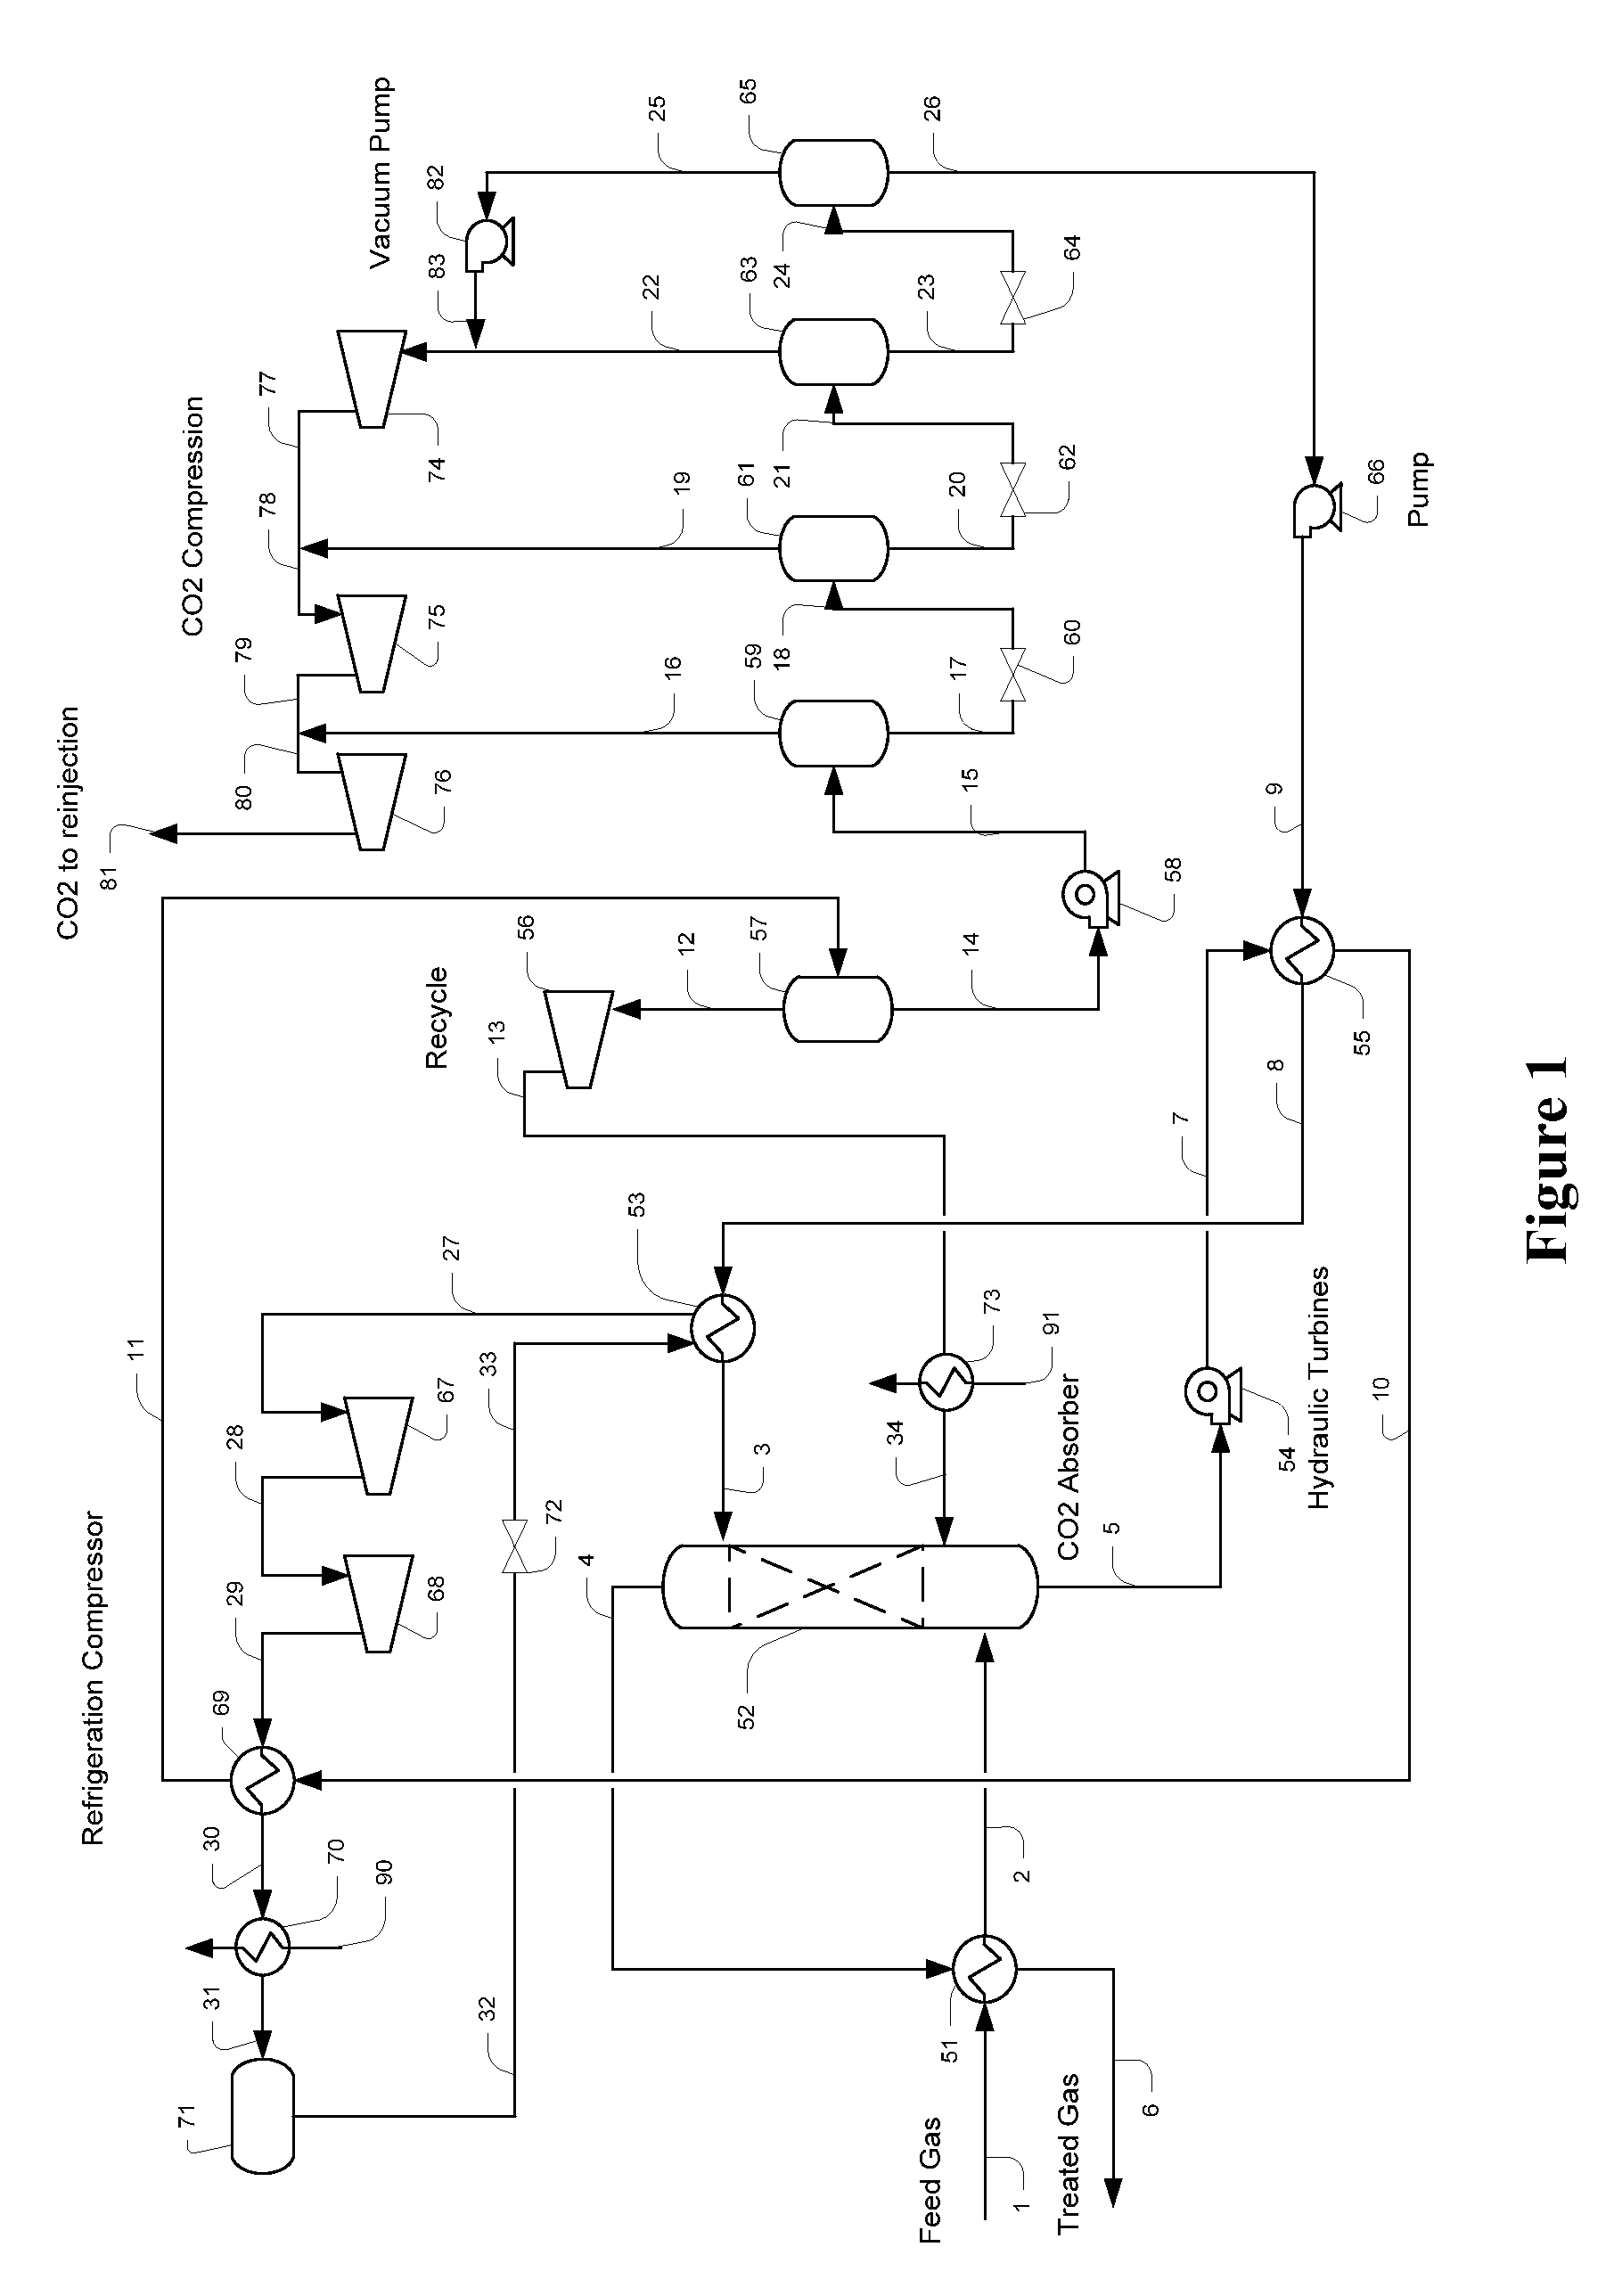 Configurations And Methods Of High Pressure Acid Gas Removal